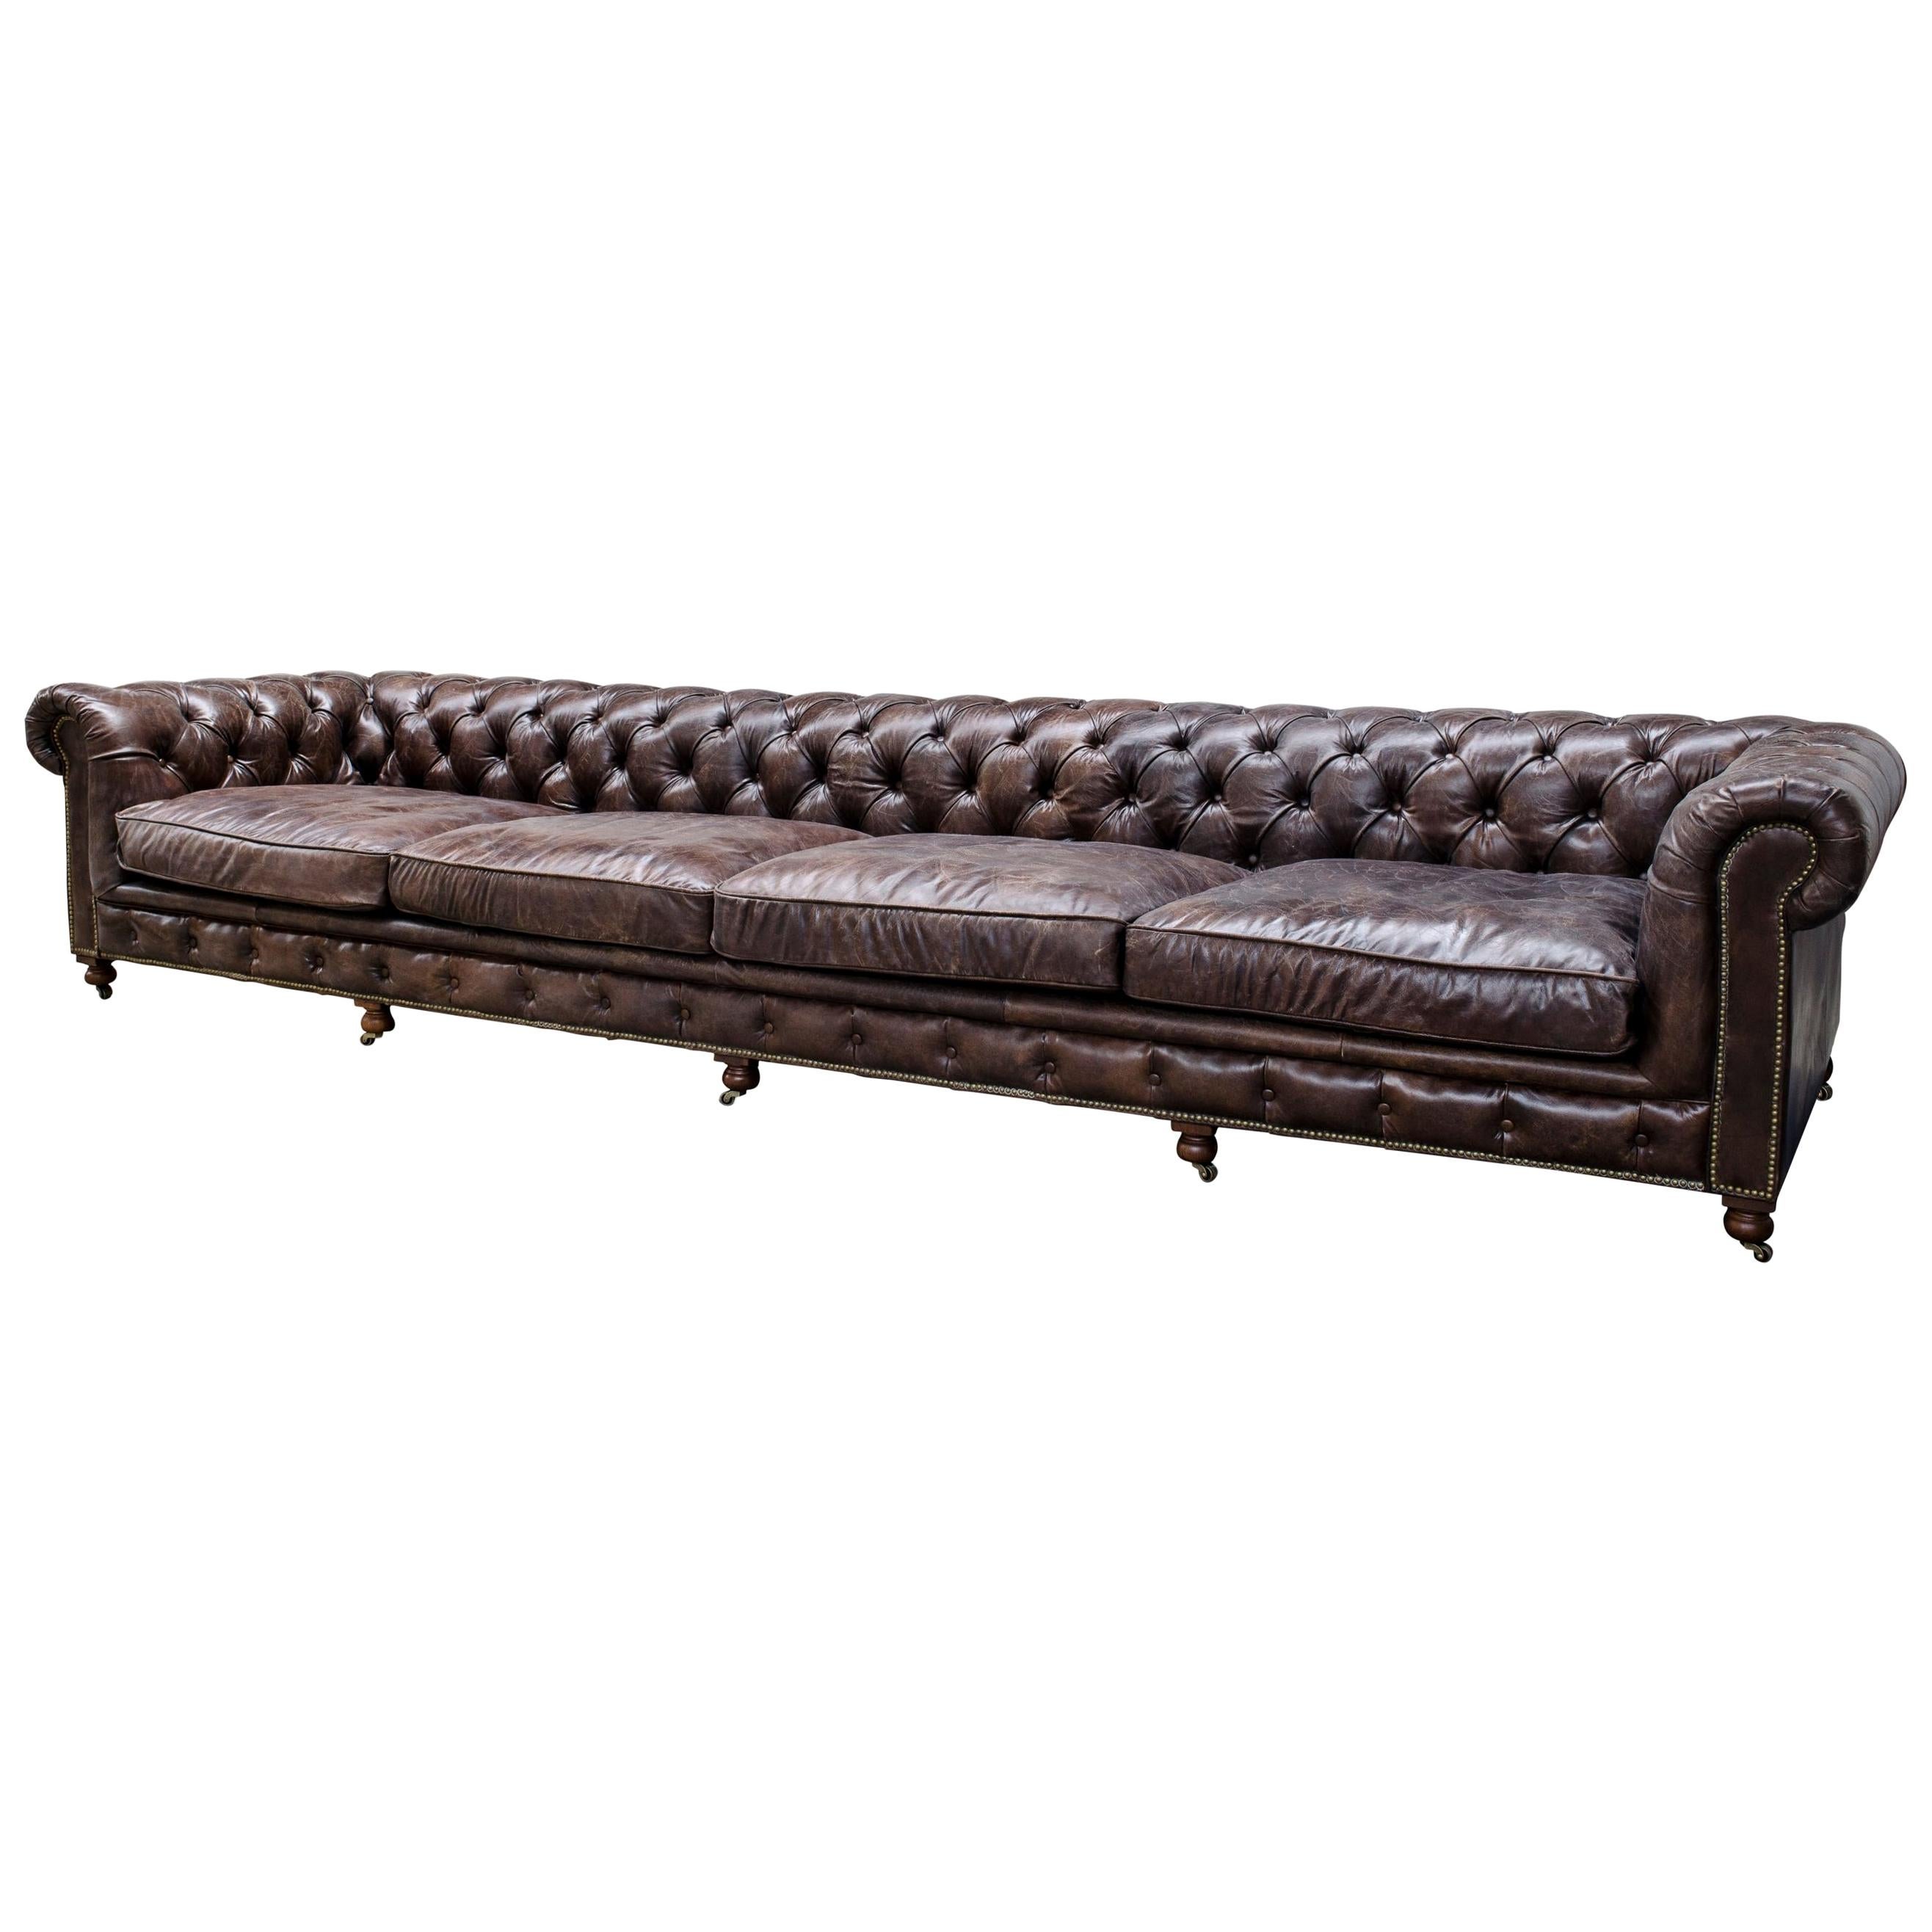 Brown Leather and Wooden Feet Chesterfield Extra Large Sofa